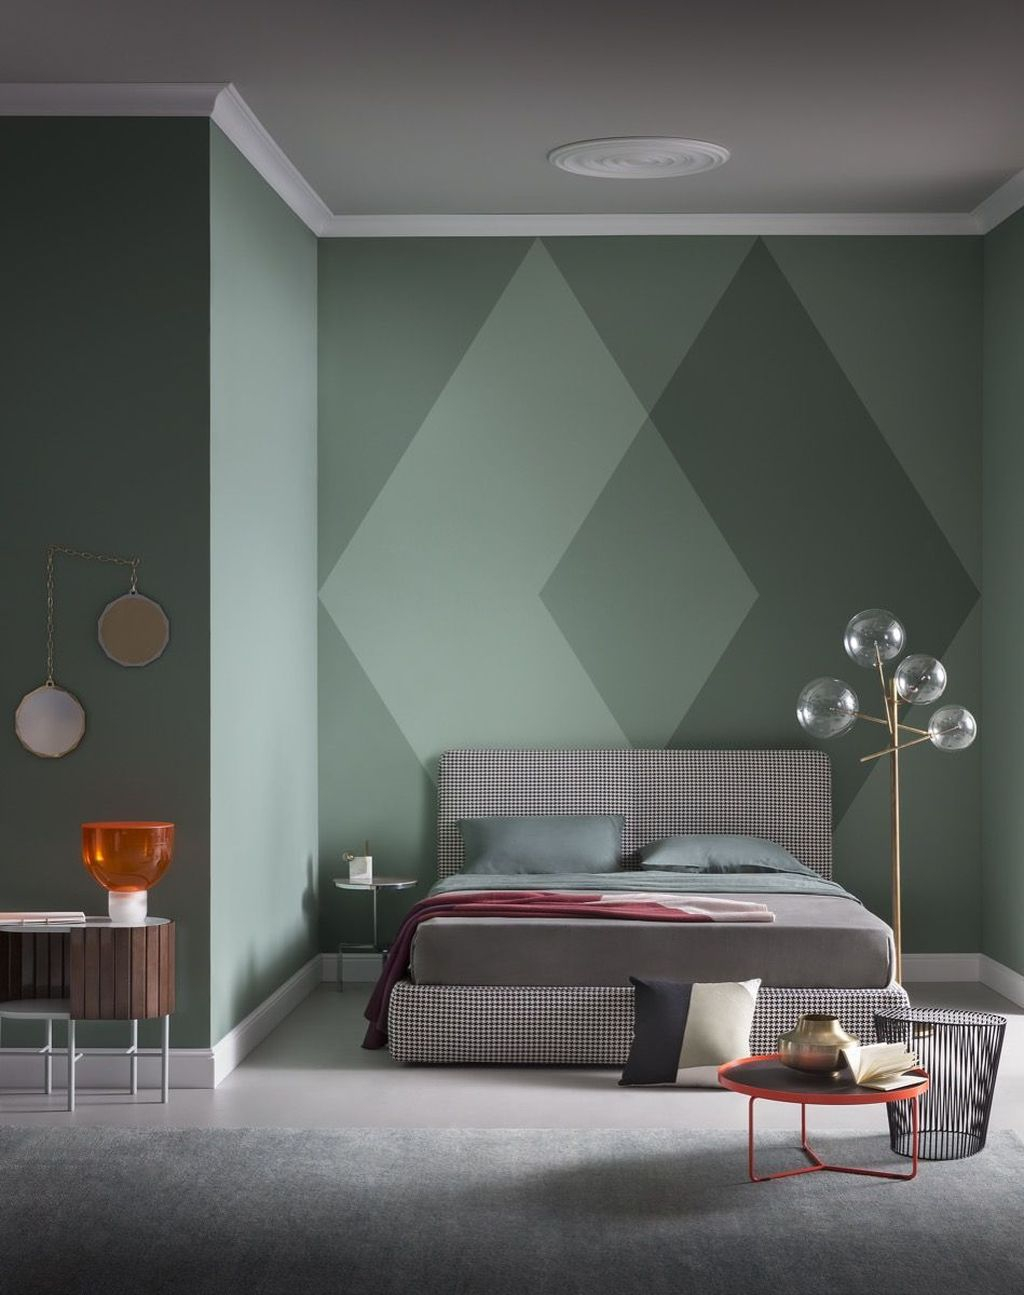 Awesome Wall Paint Color Combination Design Ideas For The Beauty Of Your Home Interior18